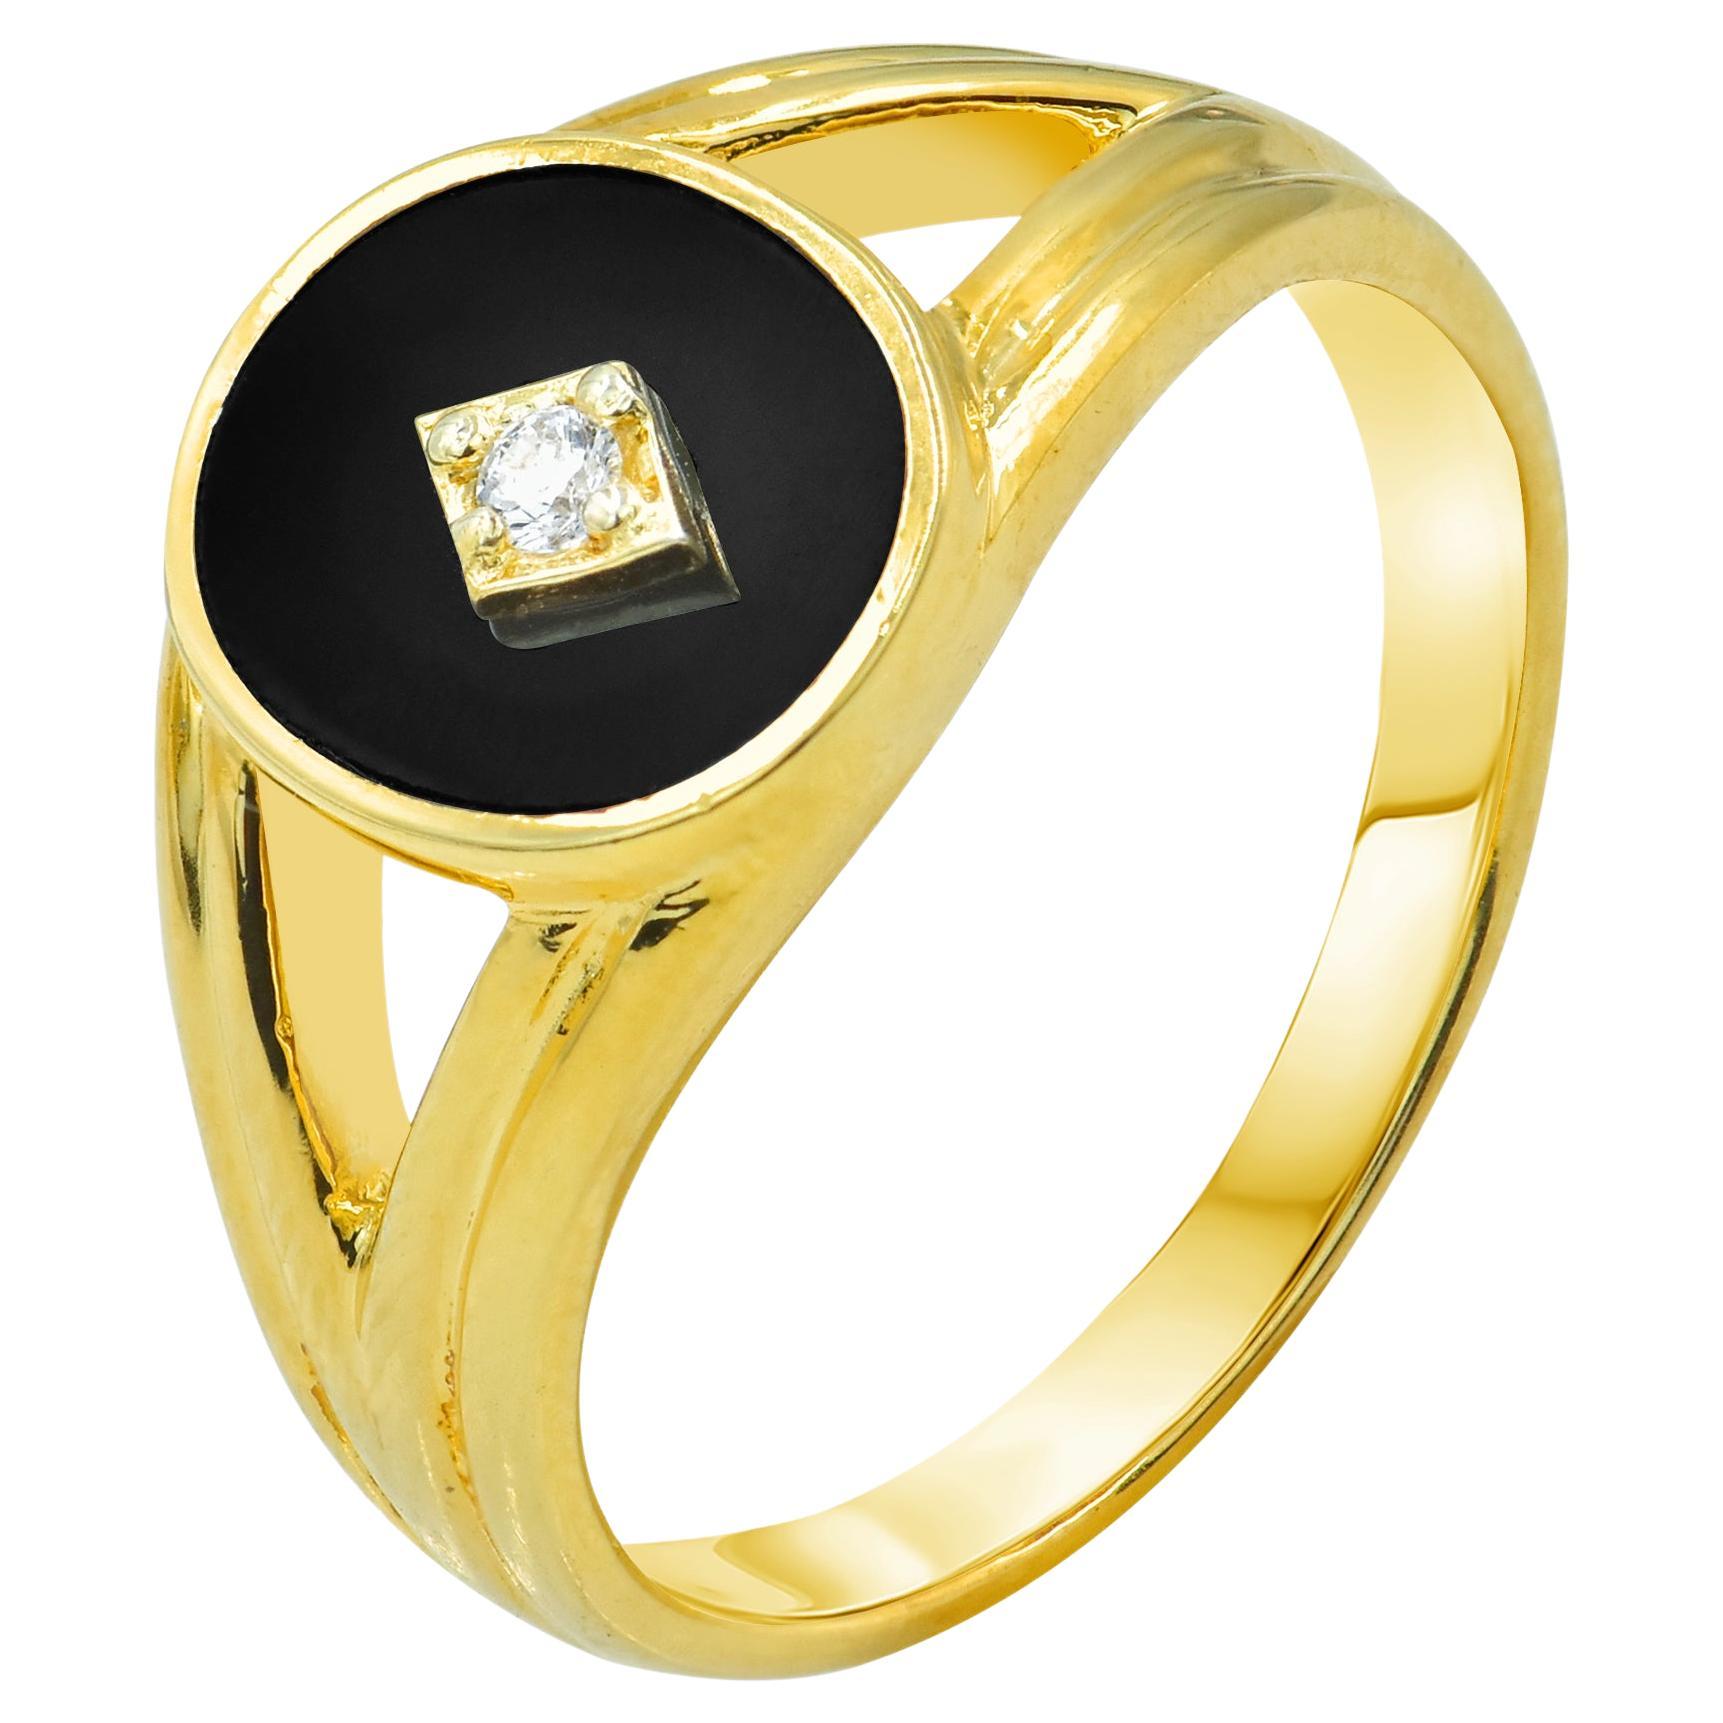 For Sale:  18K Gold filled Signet ring with Black onyx and 0.03 Carat Natural Diamond